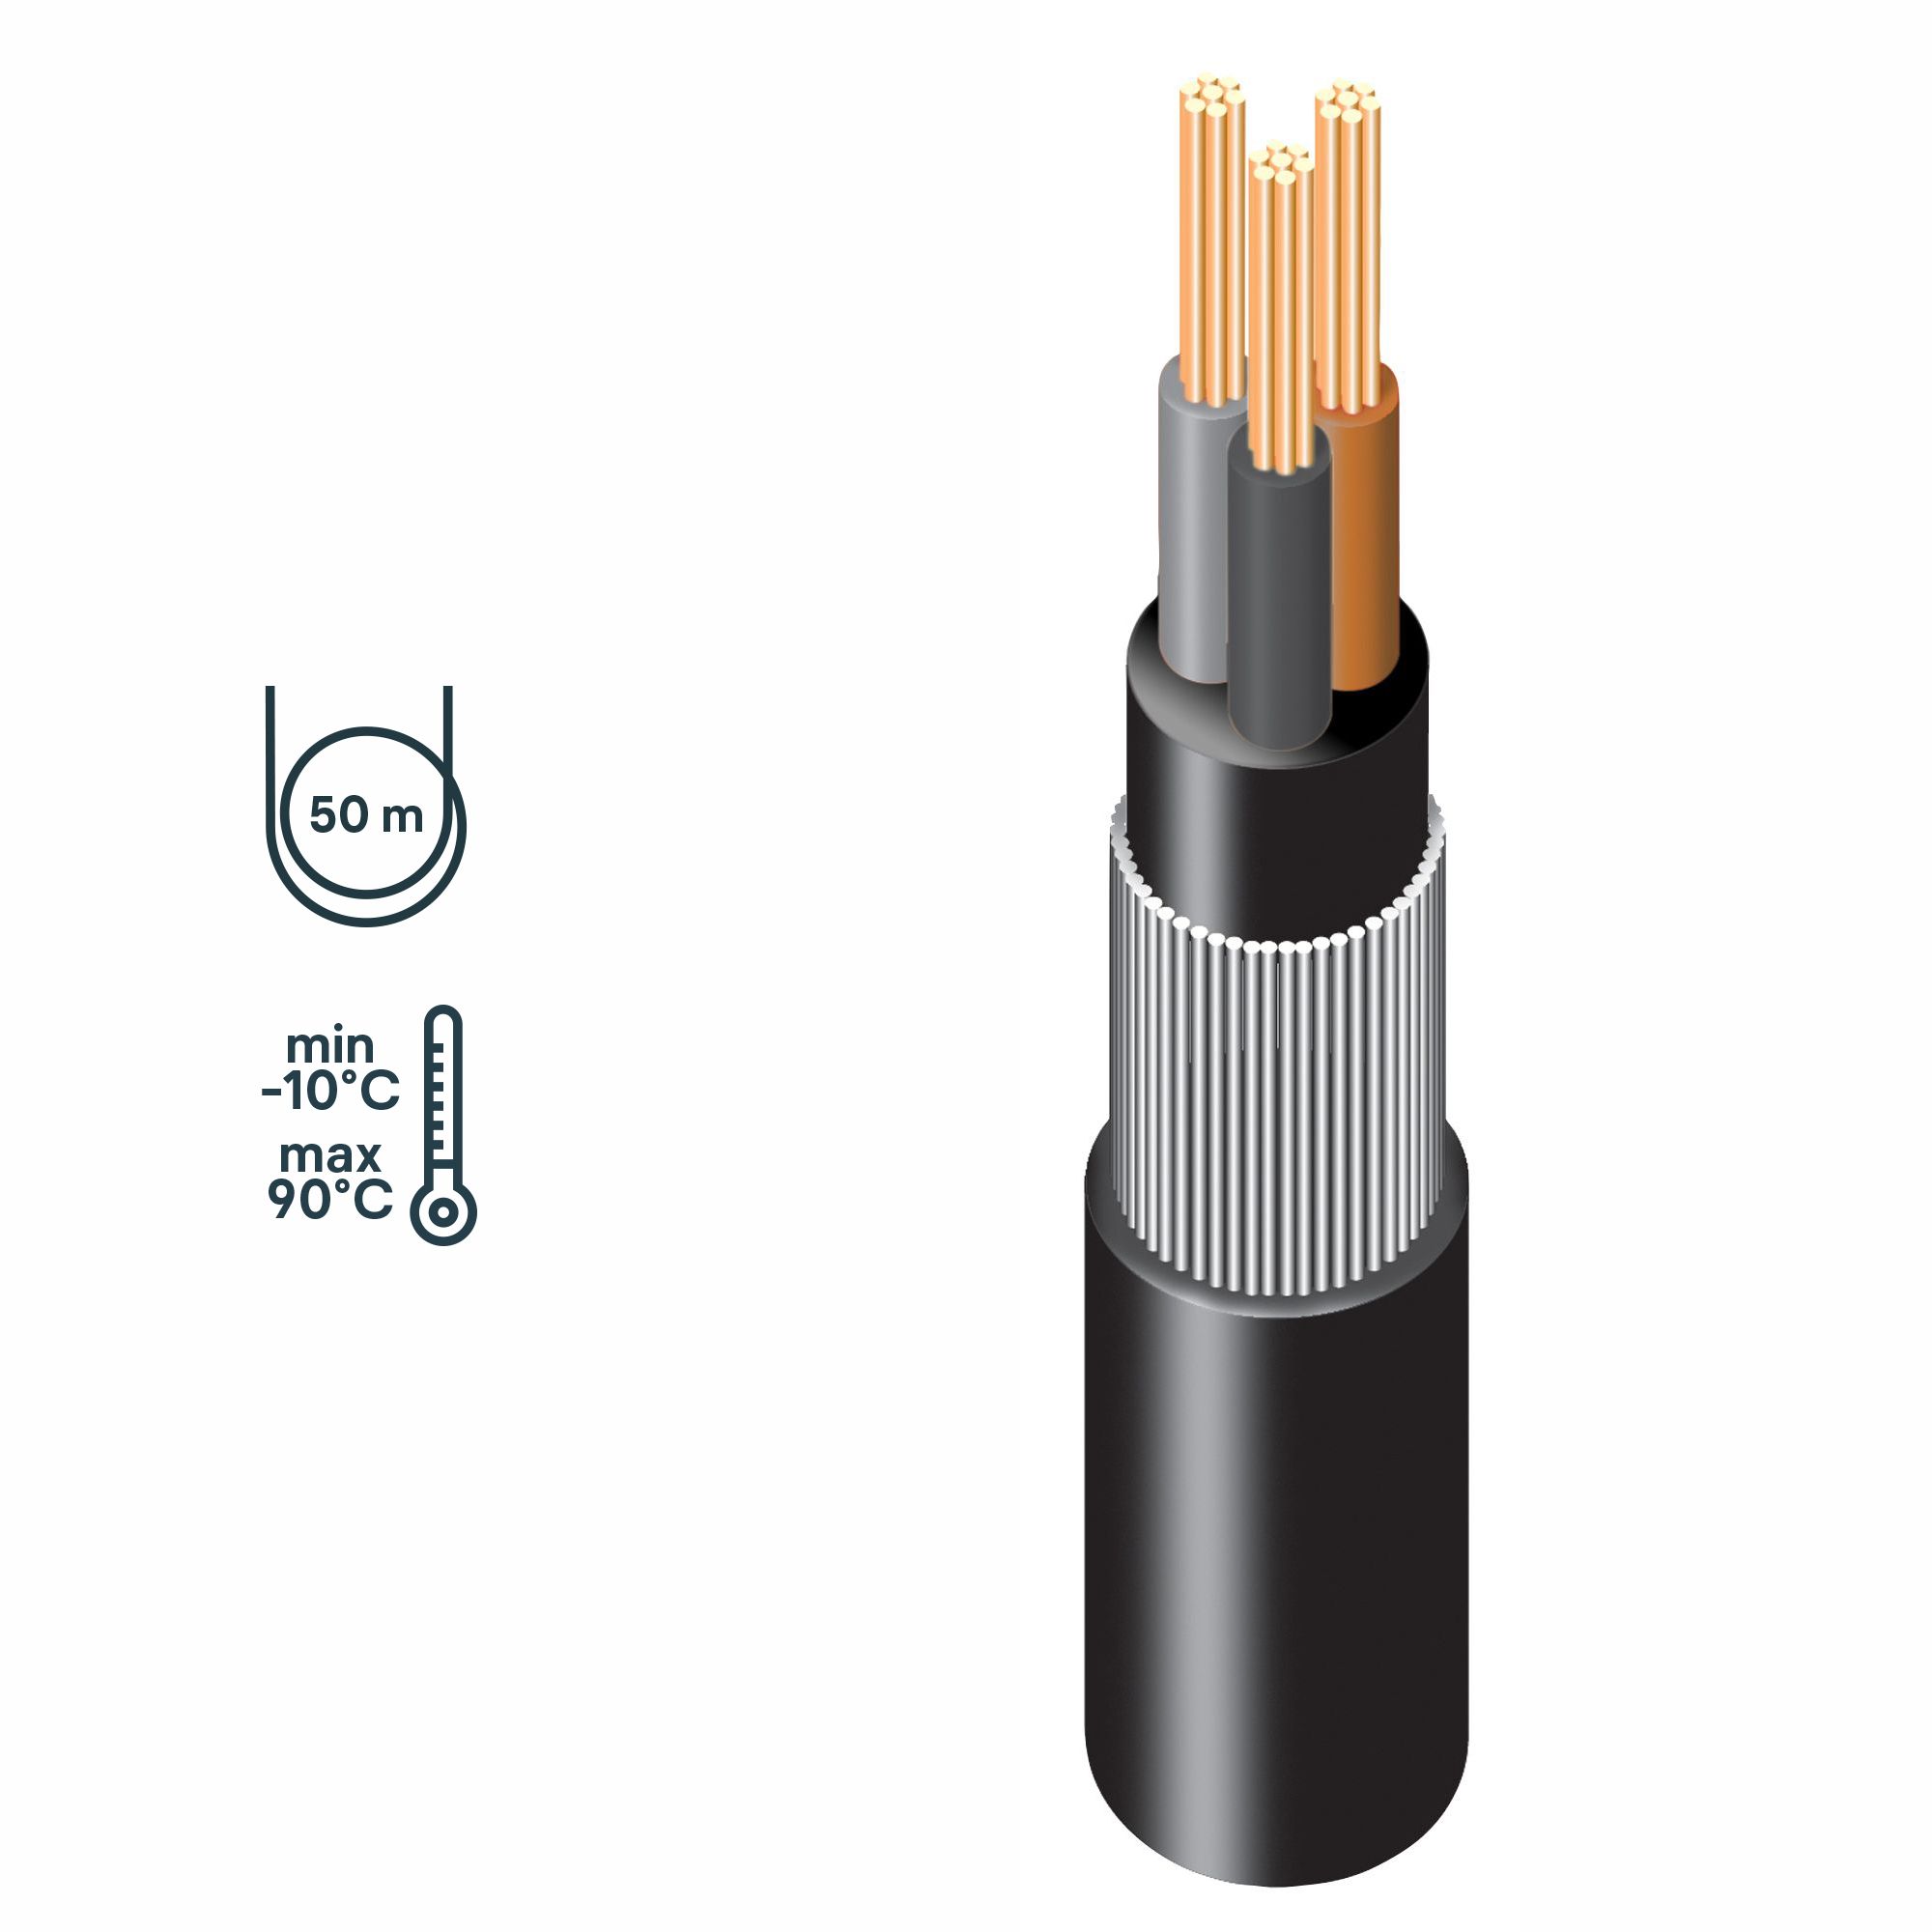 Prysmian 6943X Black 3-core Armoured Cable 2.5mm² x 50m